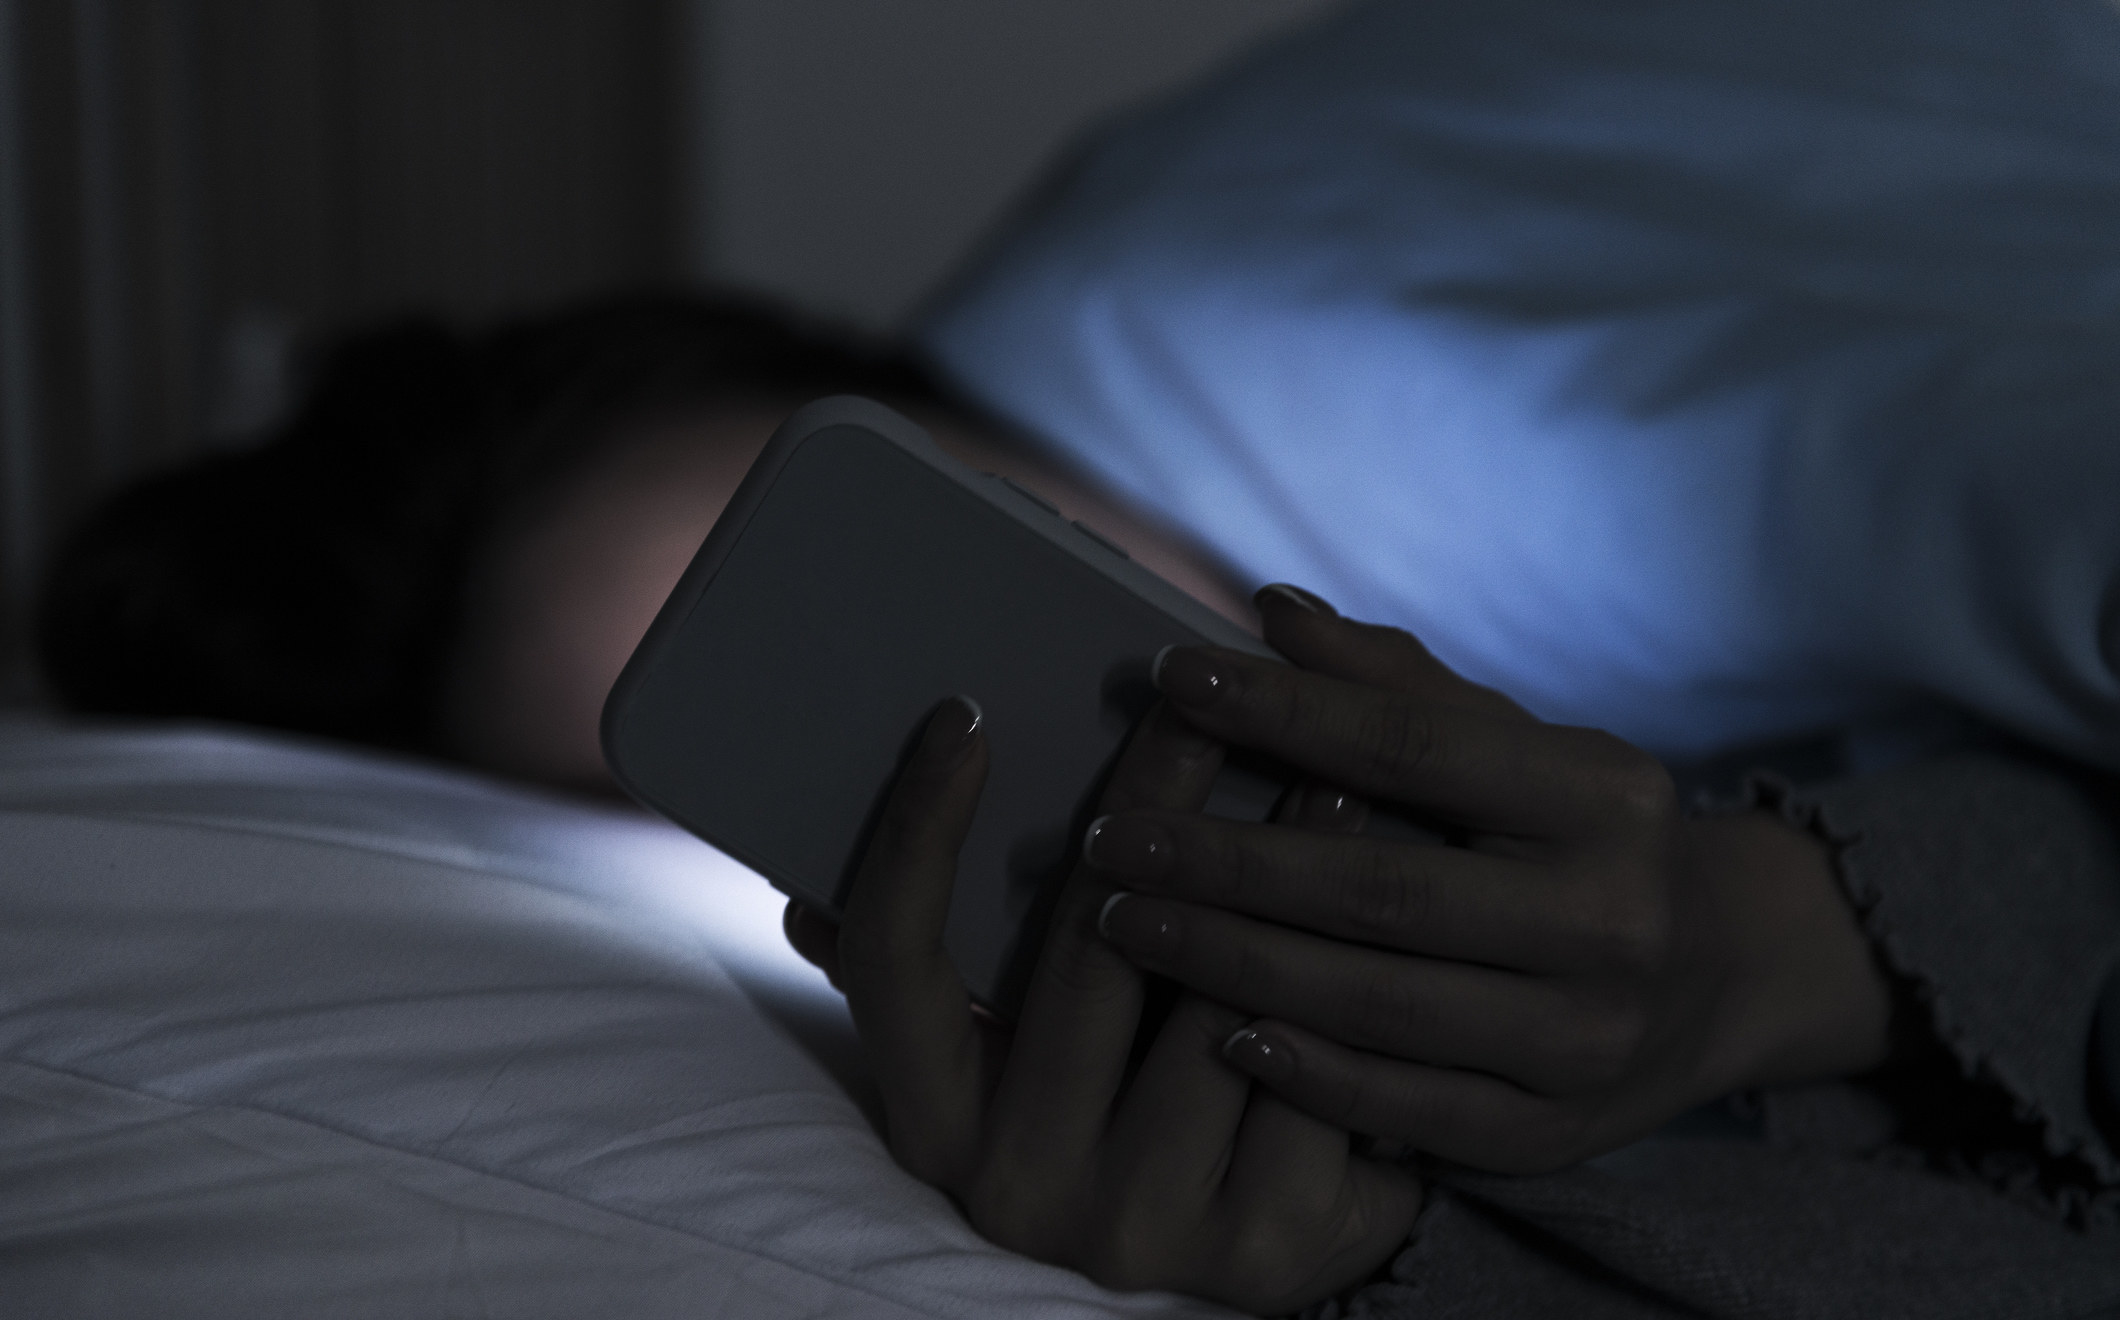 Why You Stay Up So Late, Even When You Know You Shouldn't